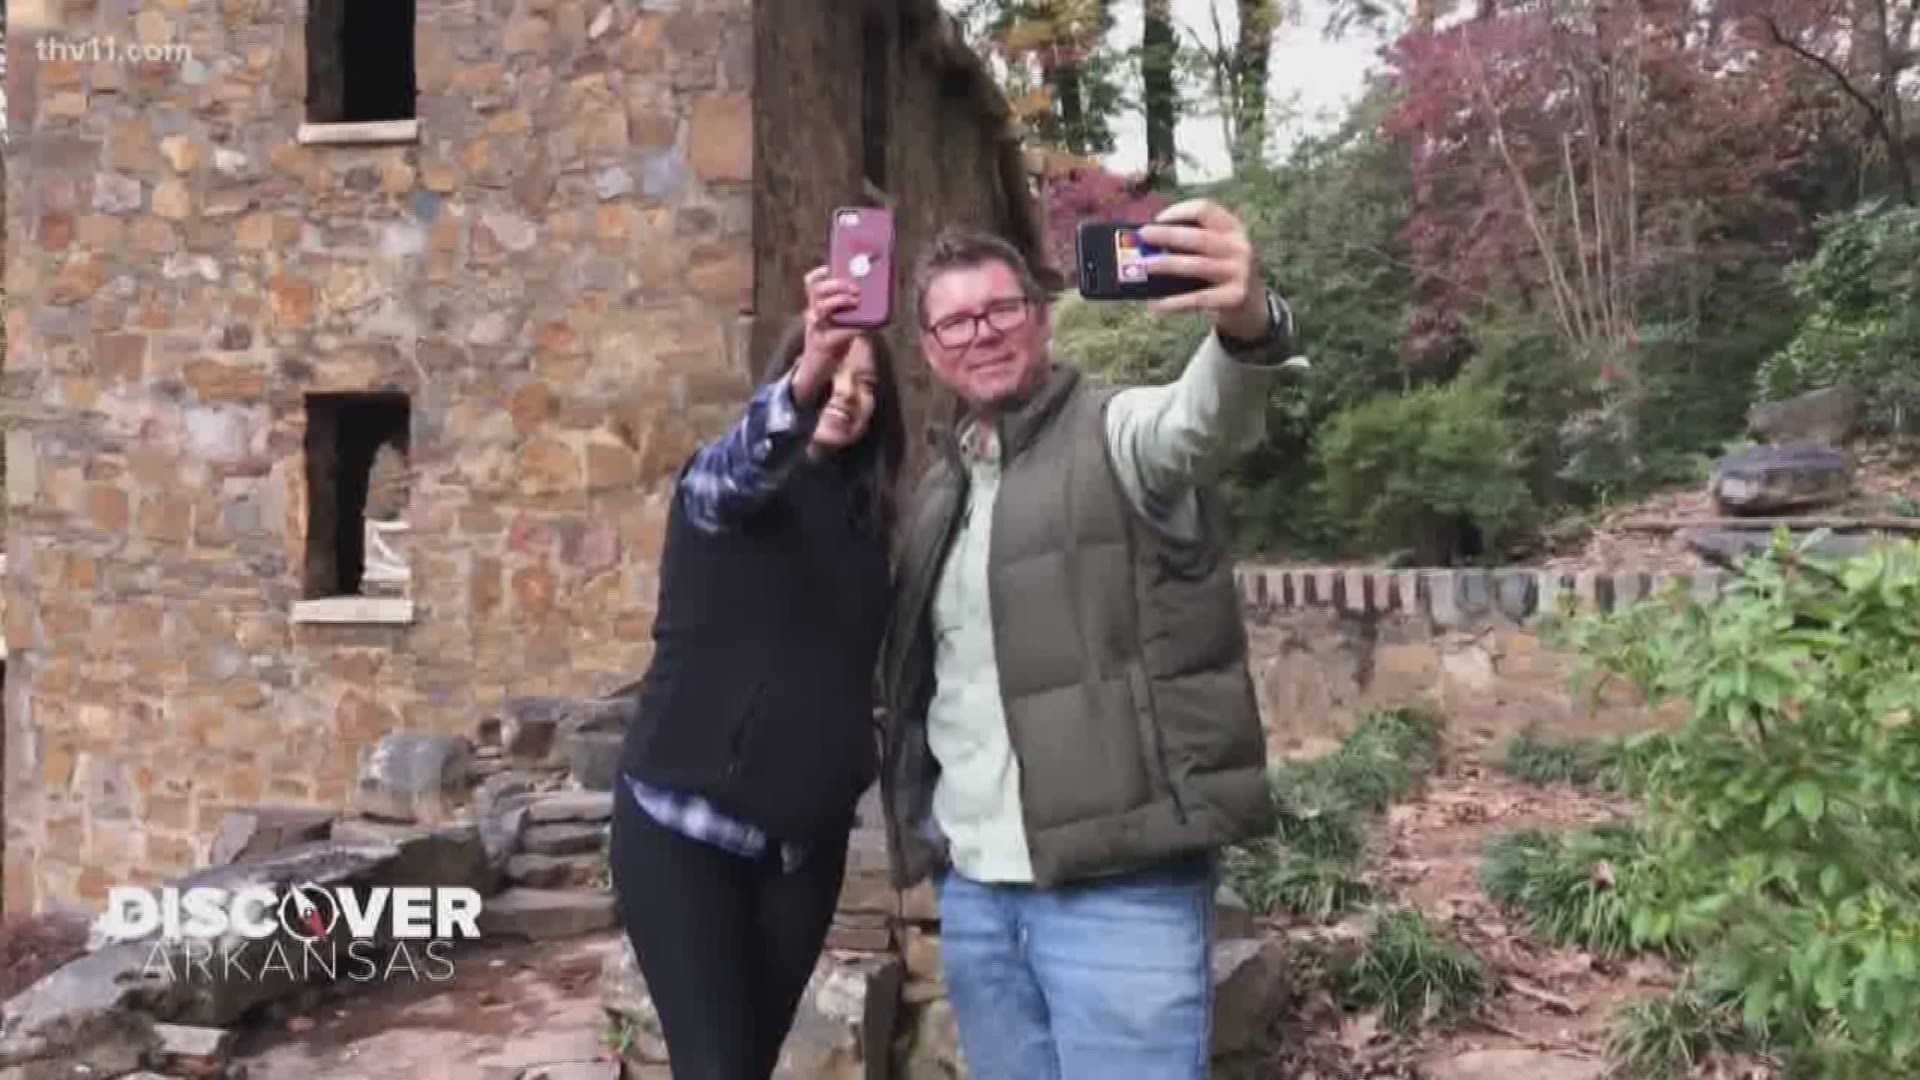 The THV11 Discover Arkansas team takes us to the Old Mill and the Lorance Creek Natural Area.